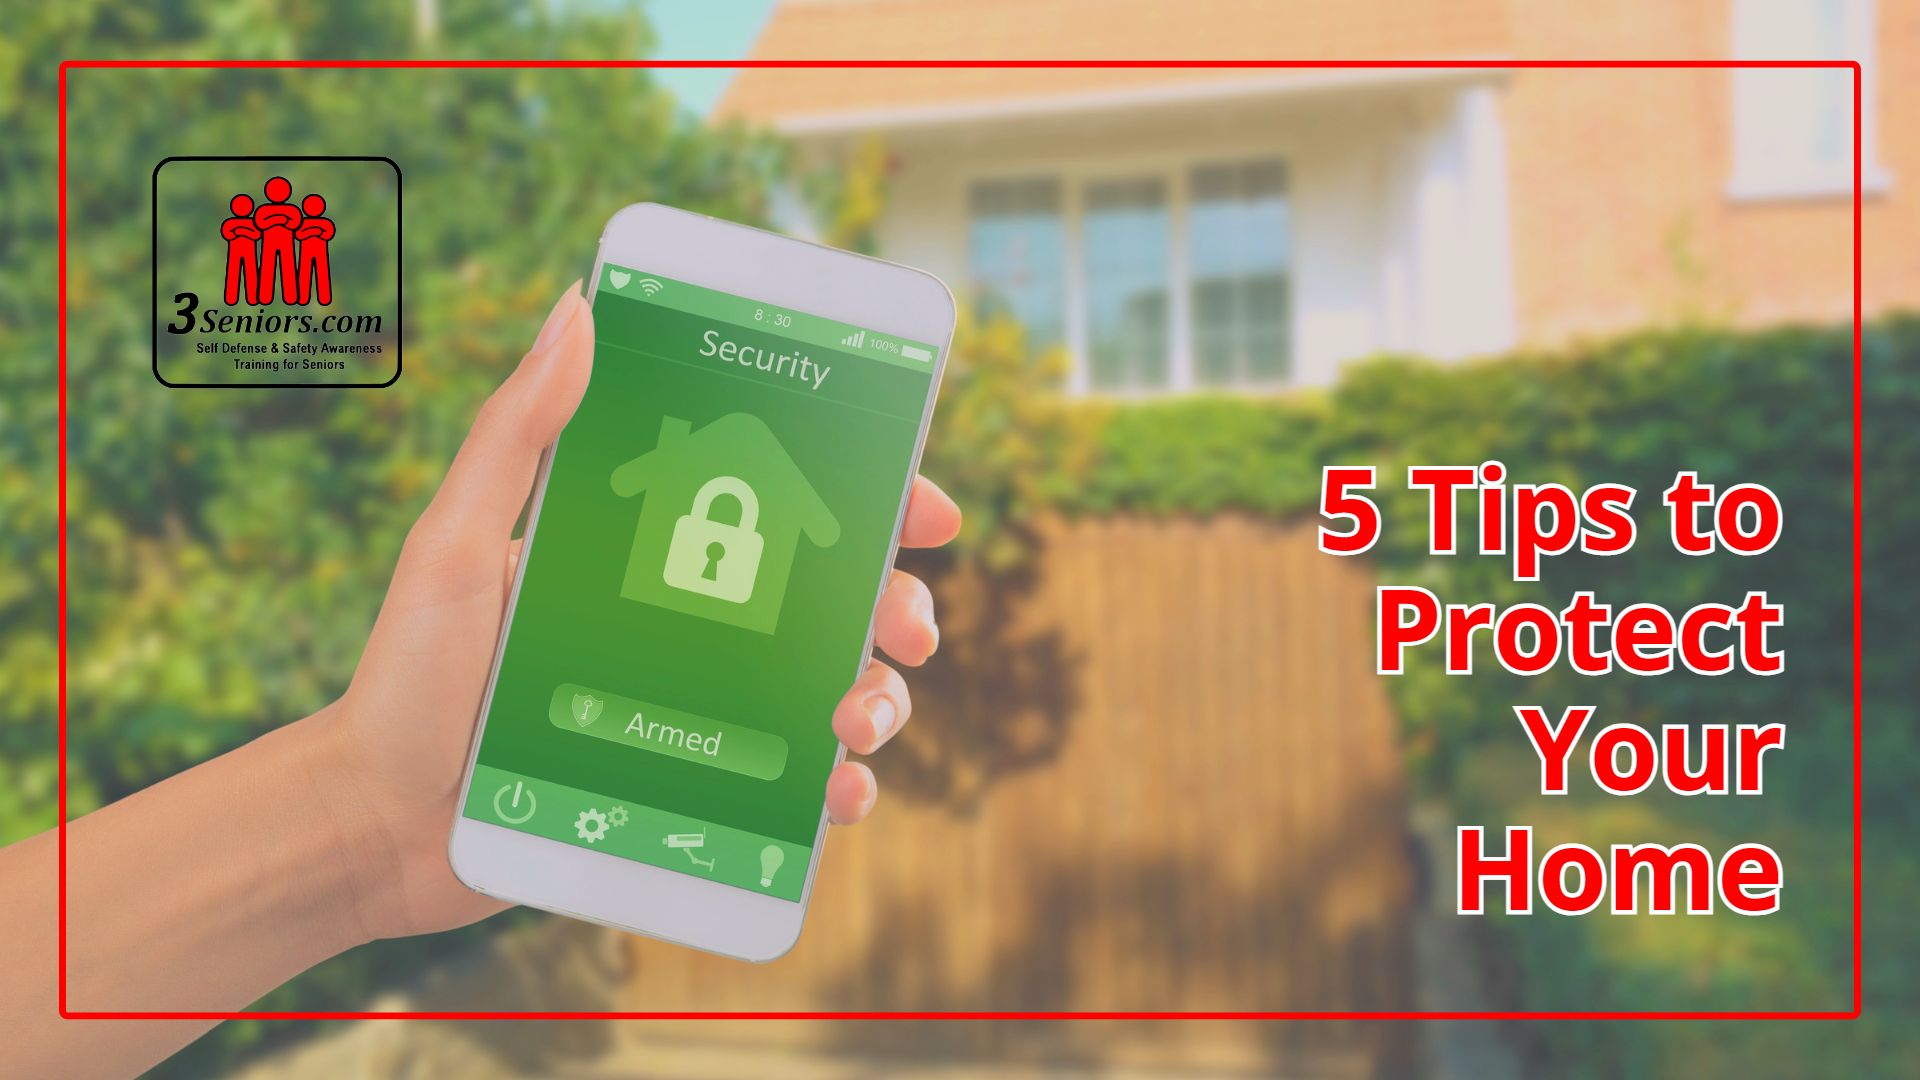 5 Tips to Protect Your Home